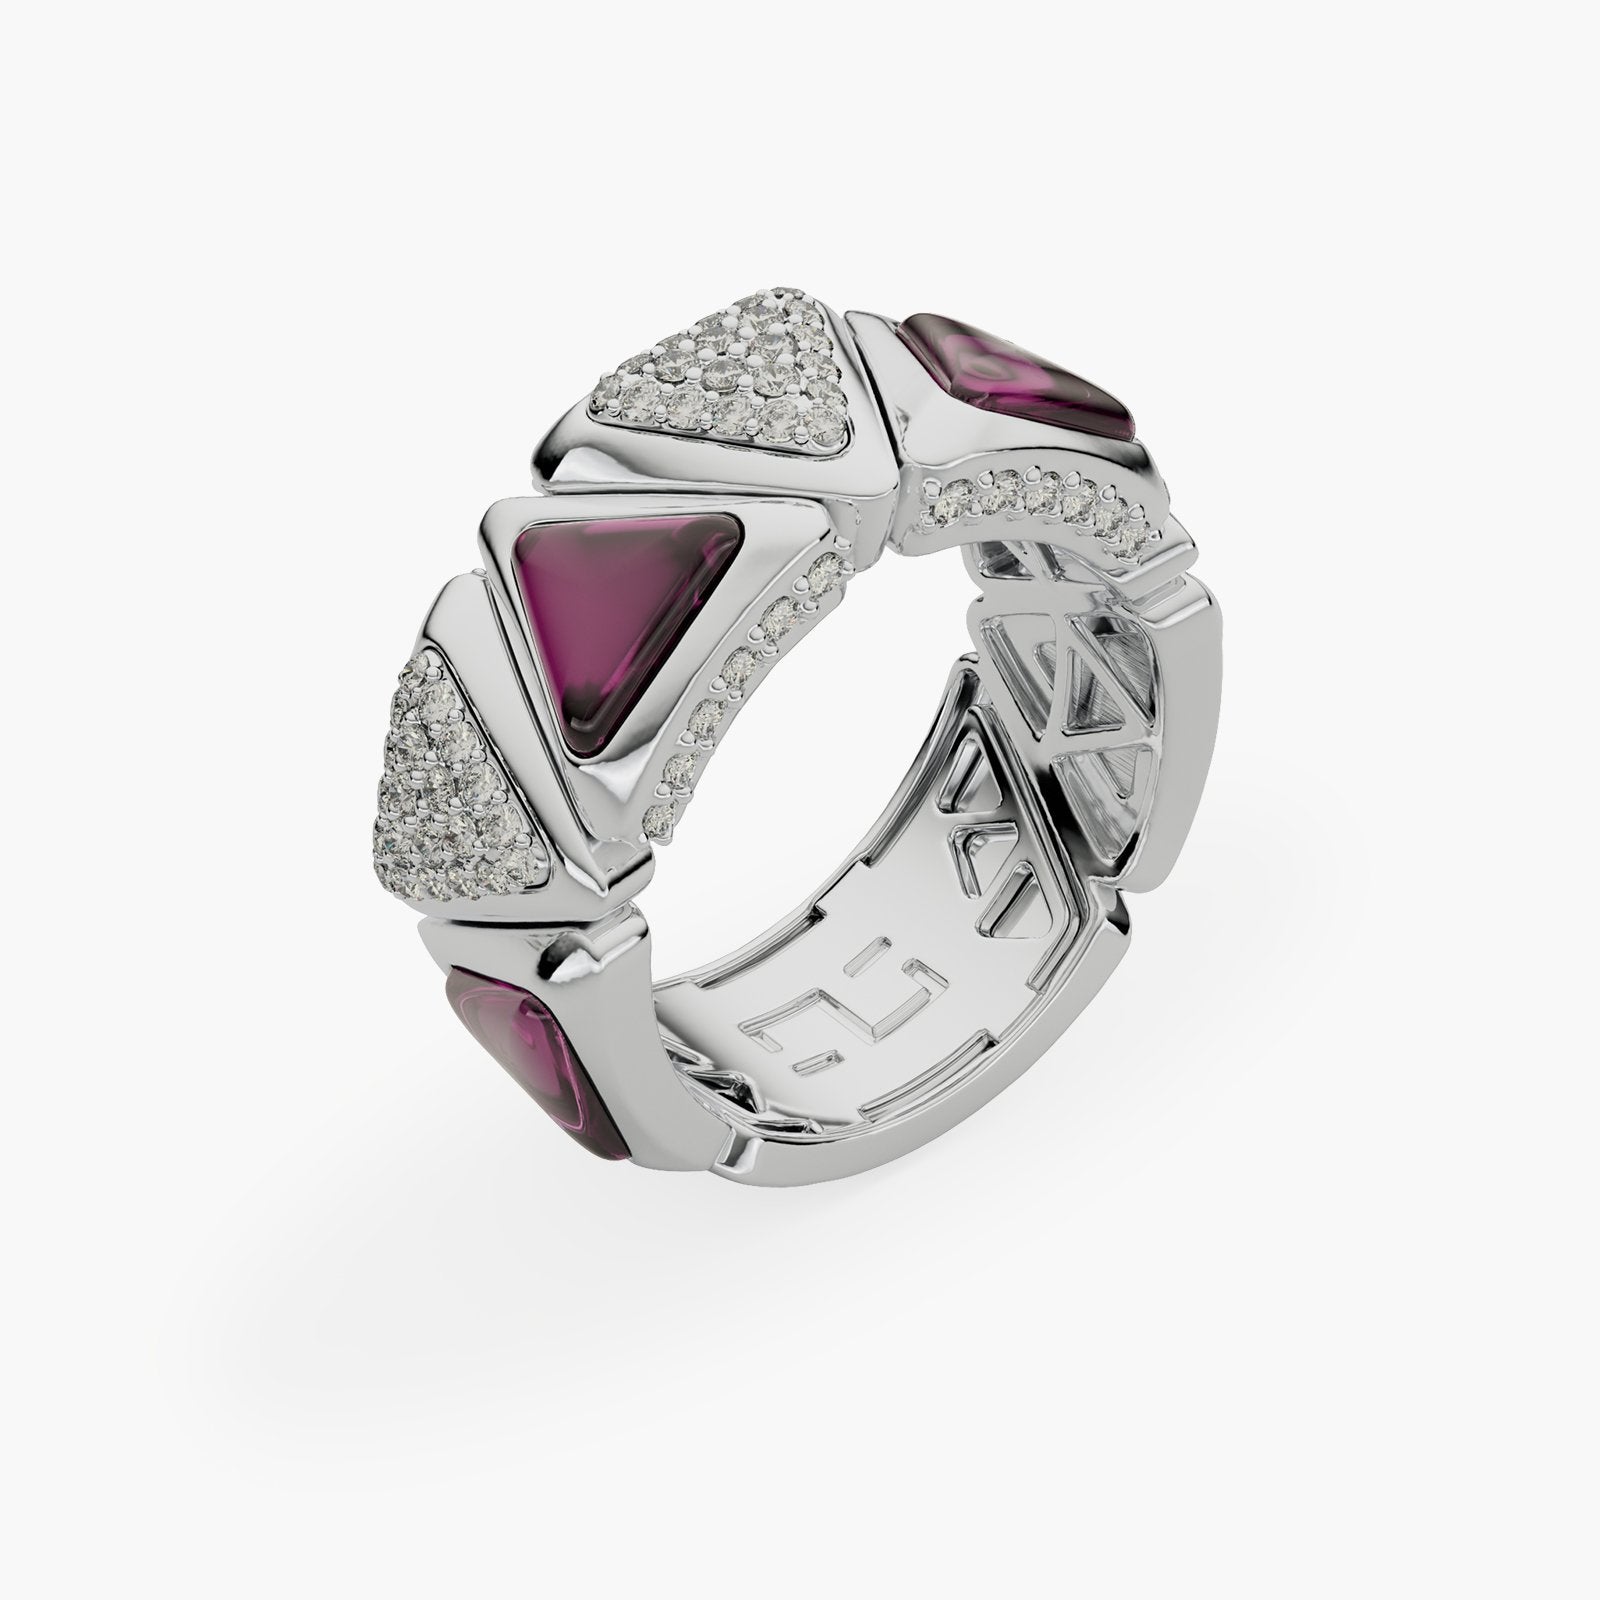 Ring Mirror Exquisite White Gold Pink Garnet and Diamonds